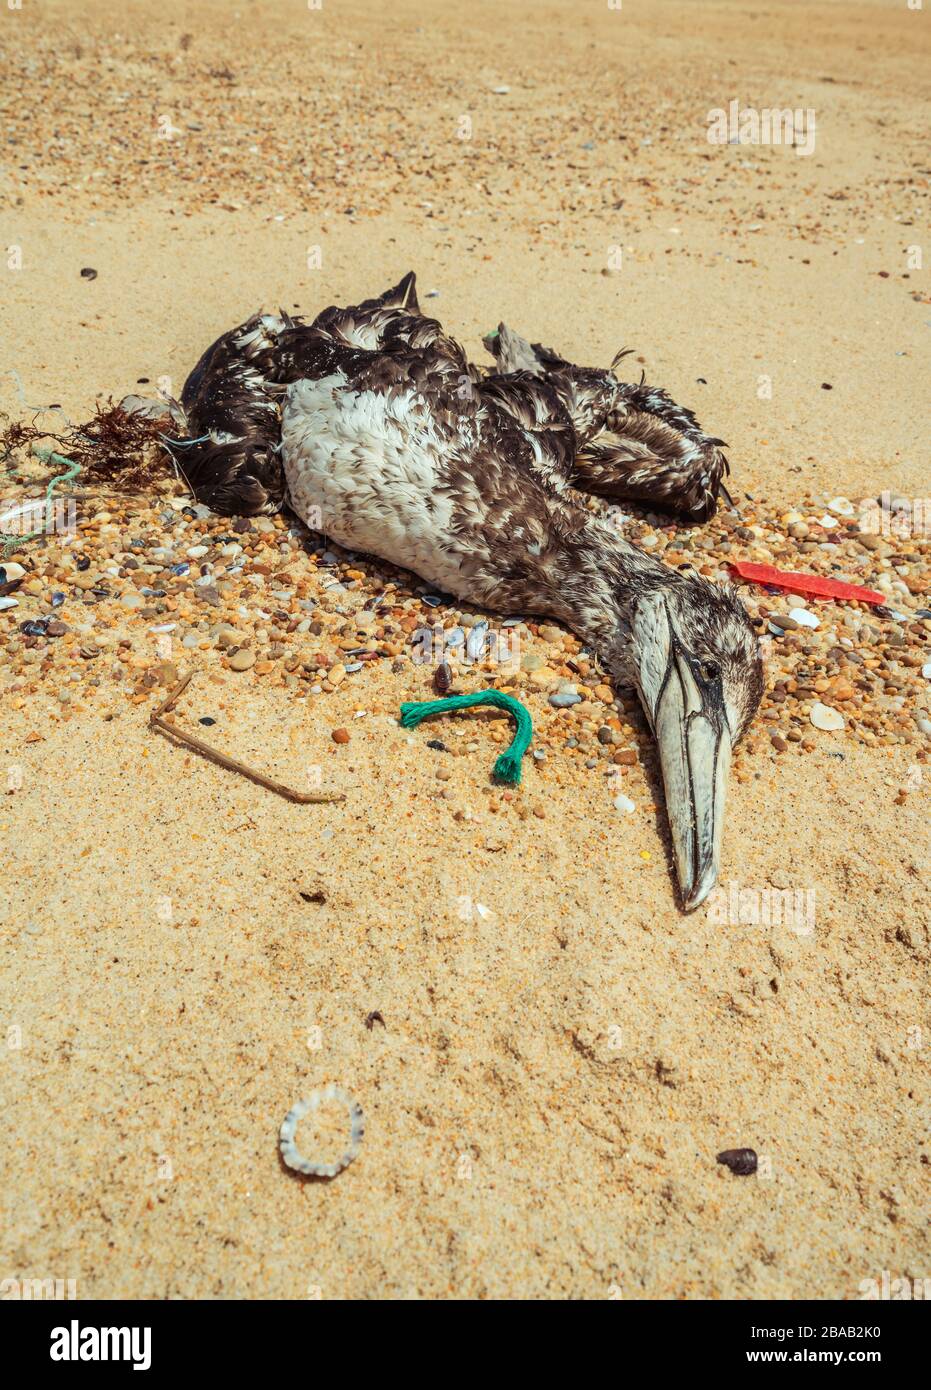 Dead seagull washed up on the beach surrounded by waste plastic Stock Photo